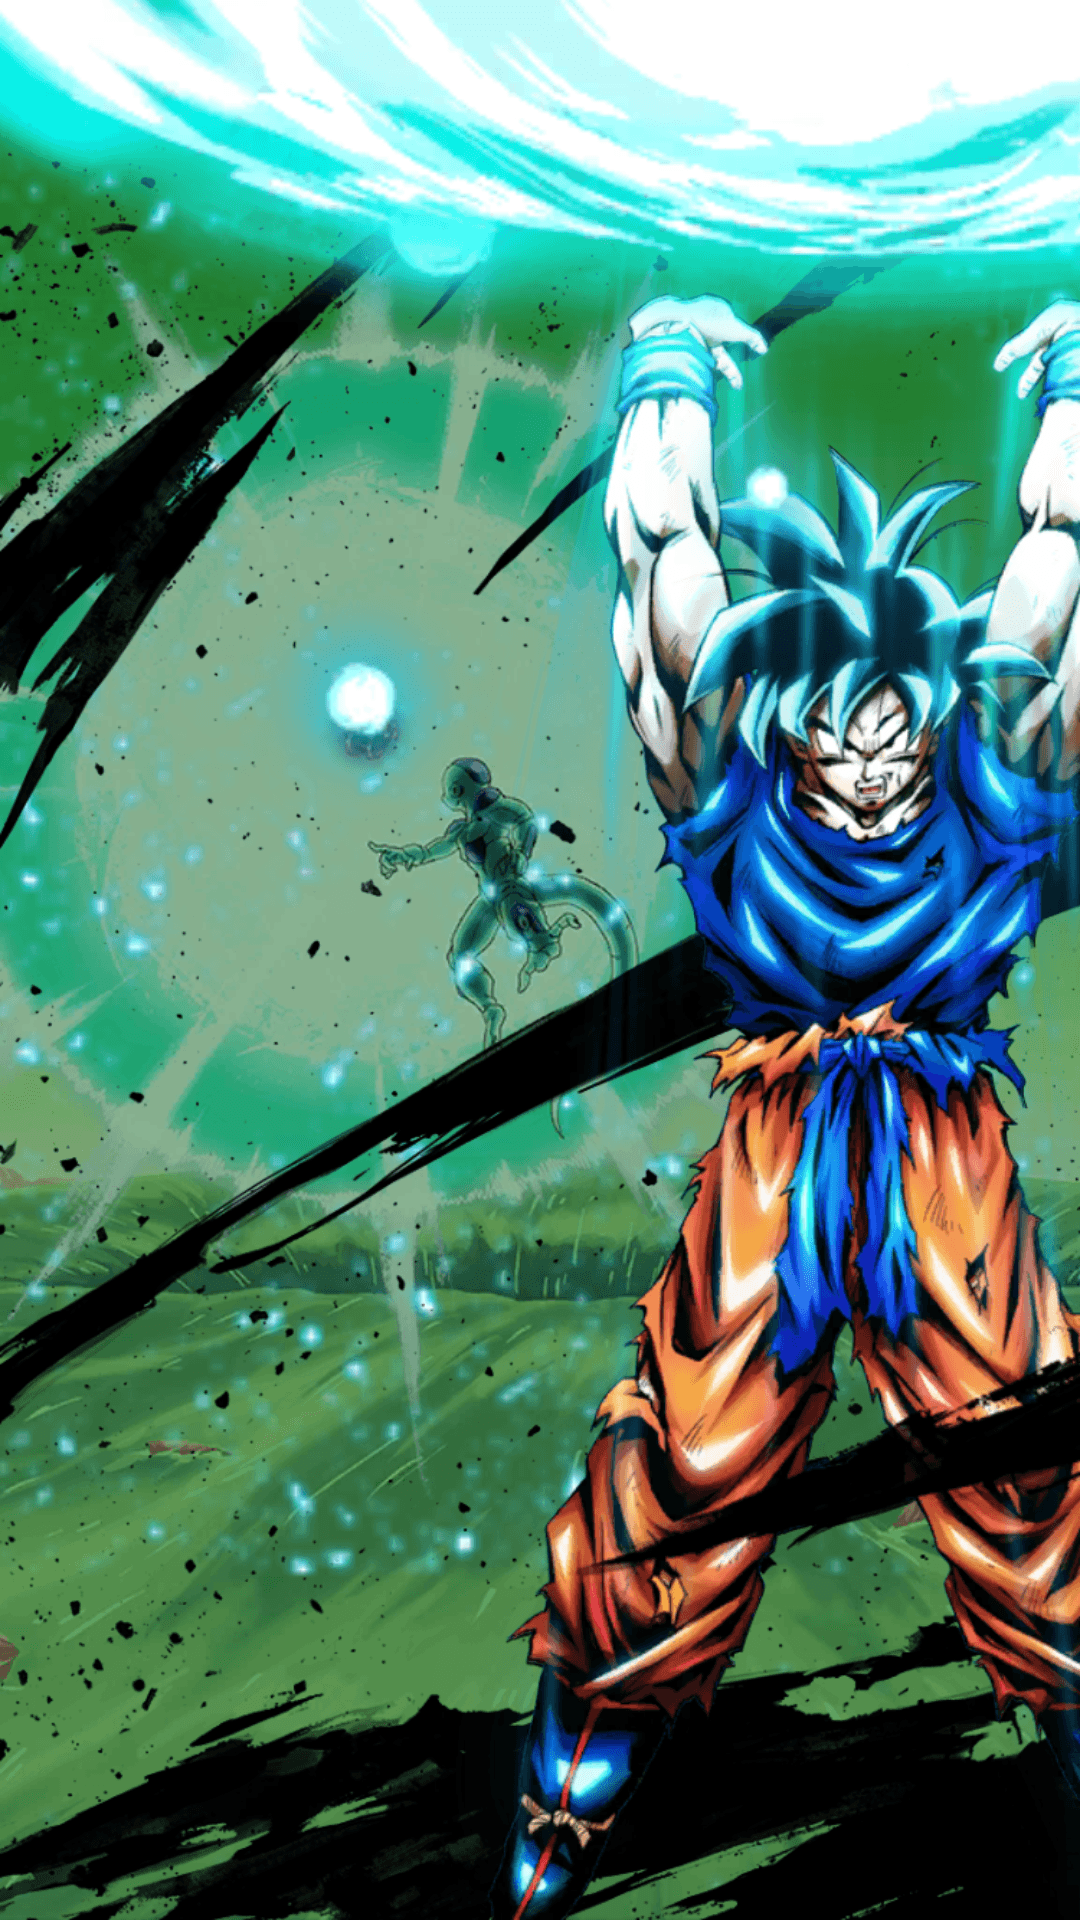 Dragonball Legends HD Wallpaper For Android or iPhone